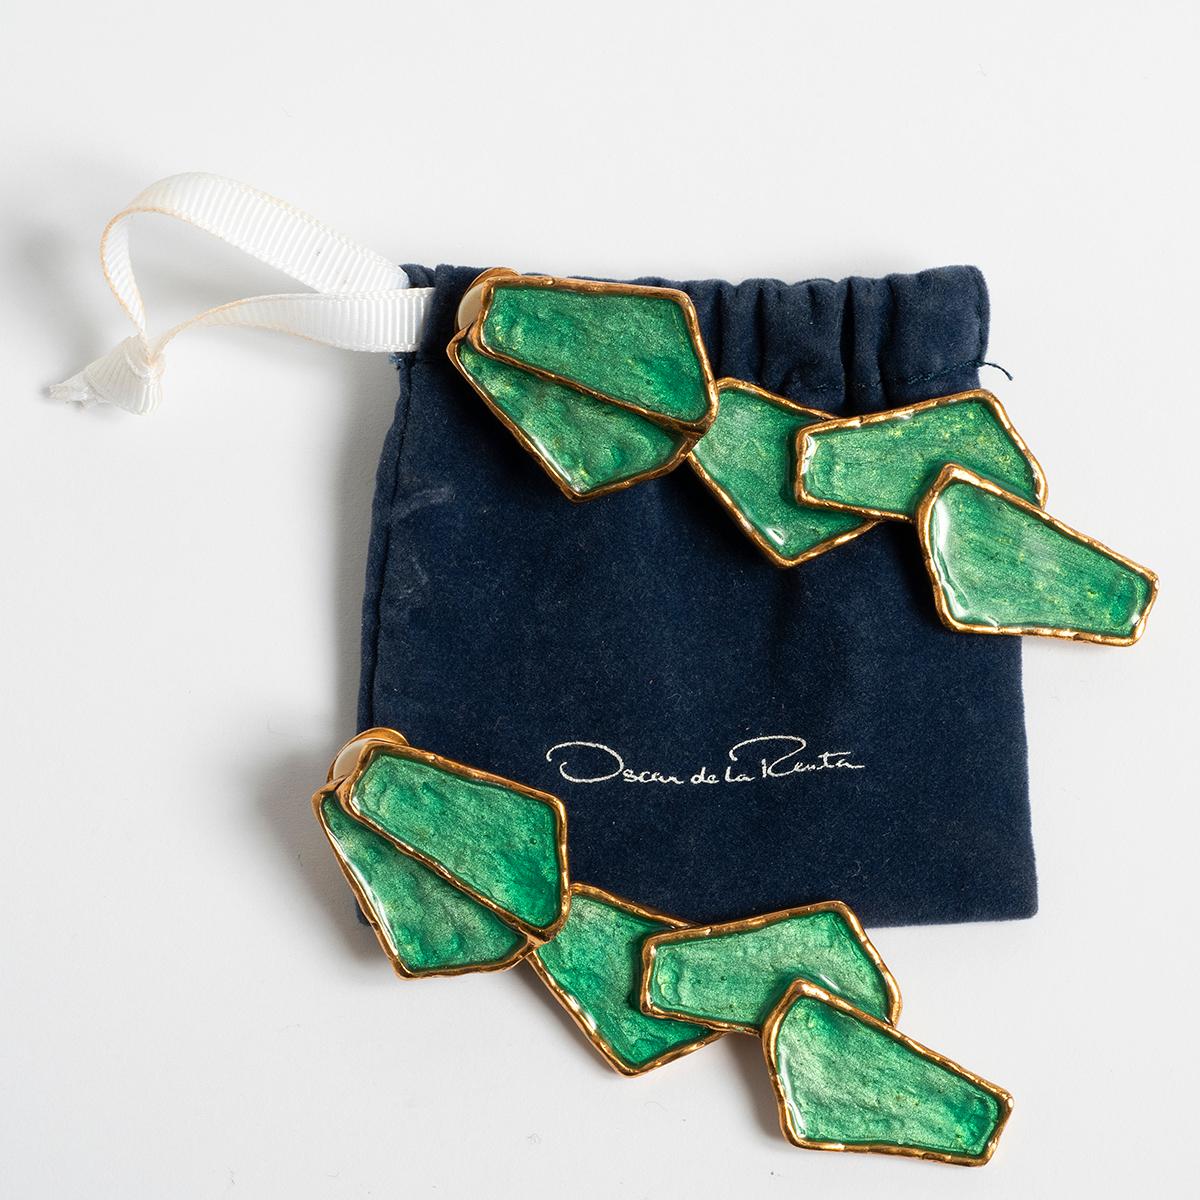 Our vintage clip on earrings by Oscar de la Renta , stamped made in USA, feature gold metal and enamel. A very stylish set of earrings, the deep measures 84.5mm and 26mm at widest point. Included is a Oscar de la Renta pouch, and we date production